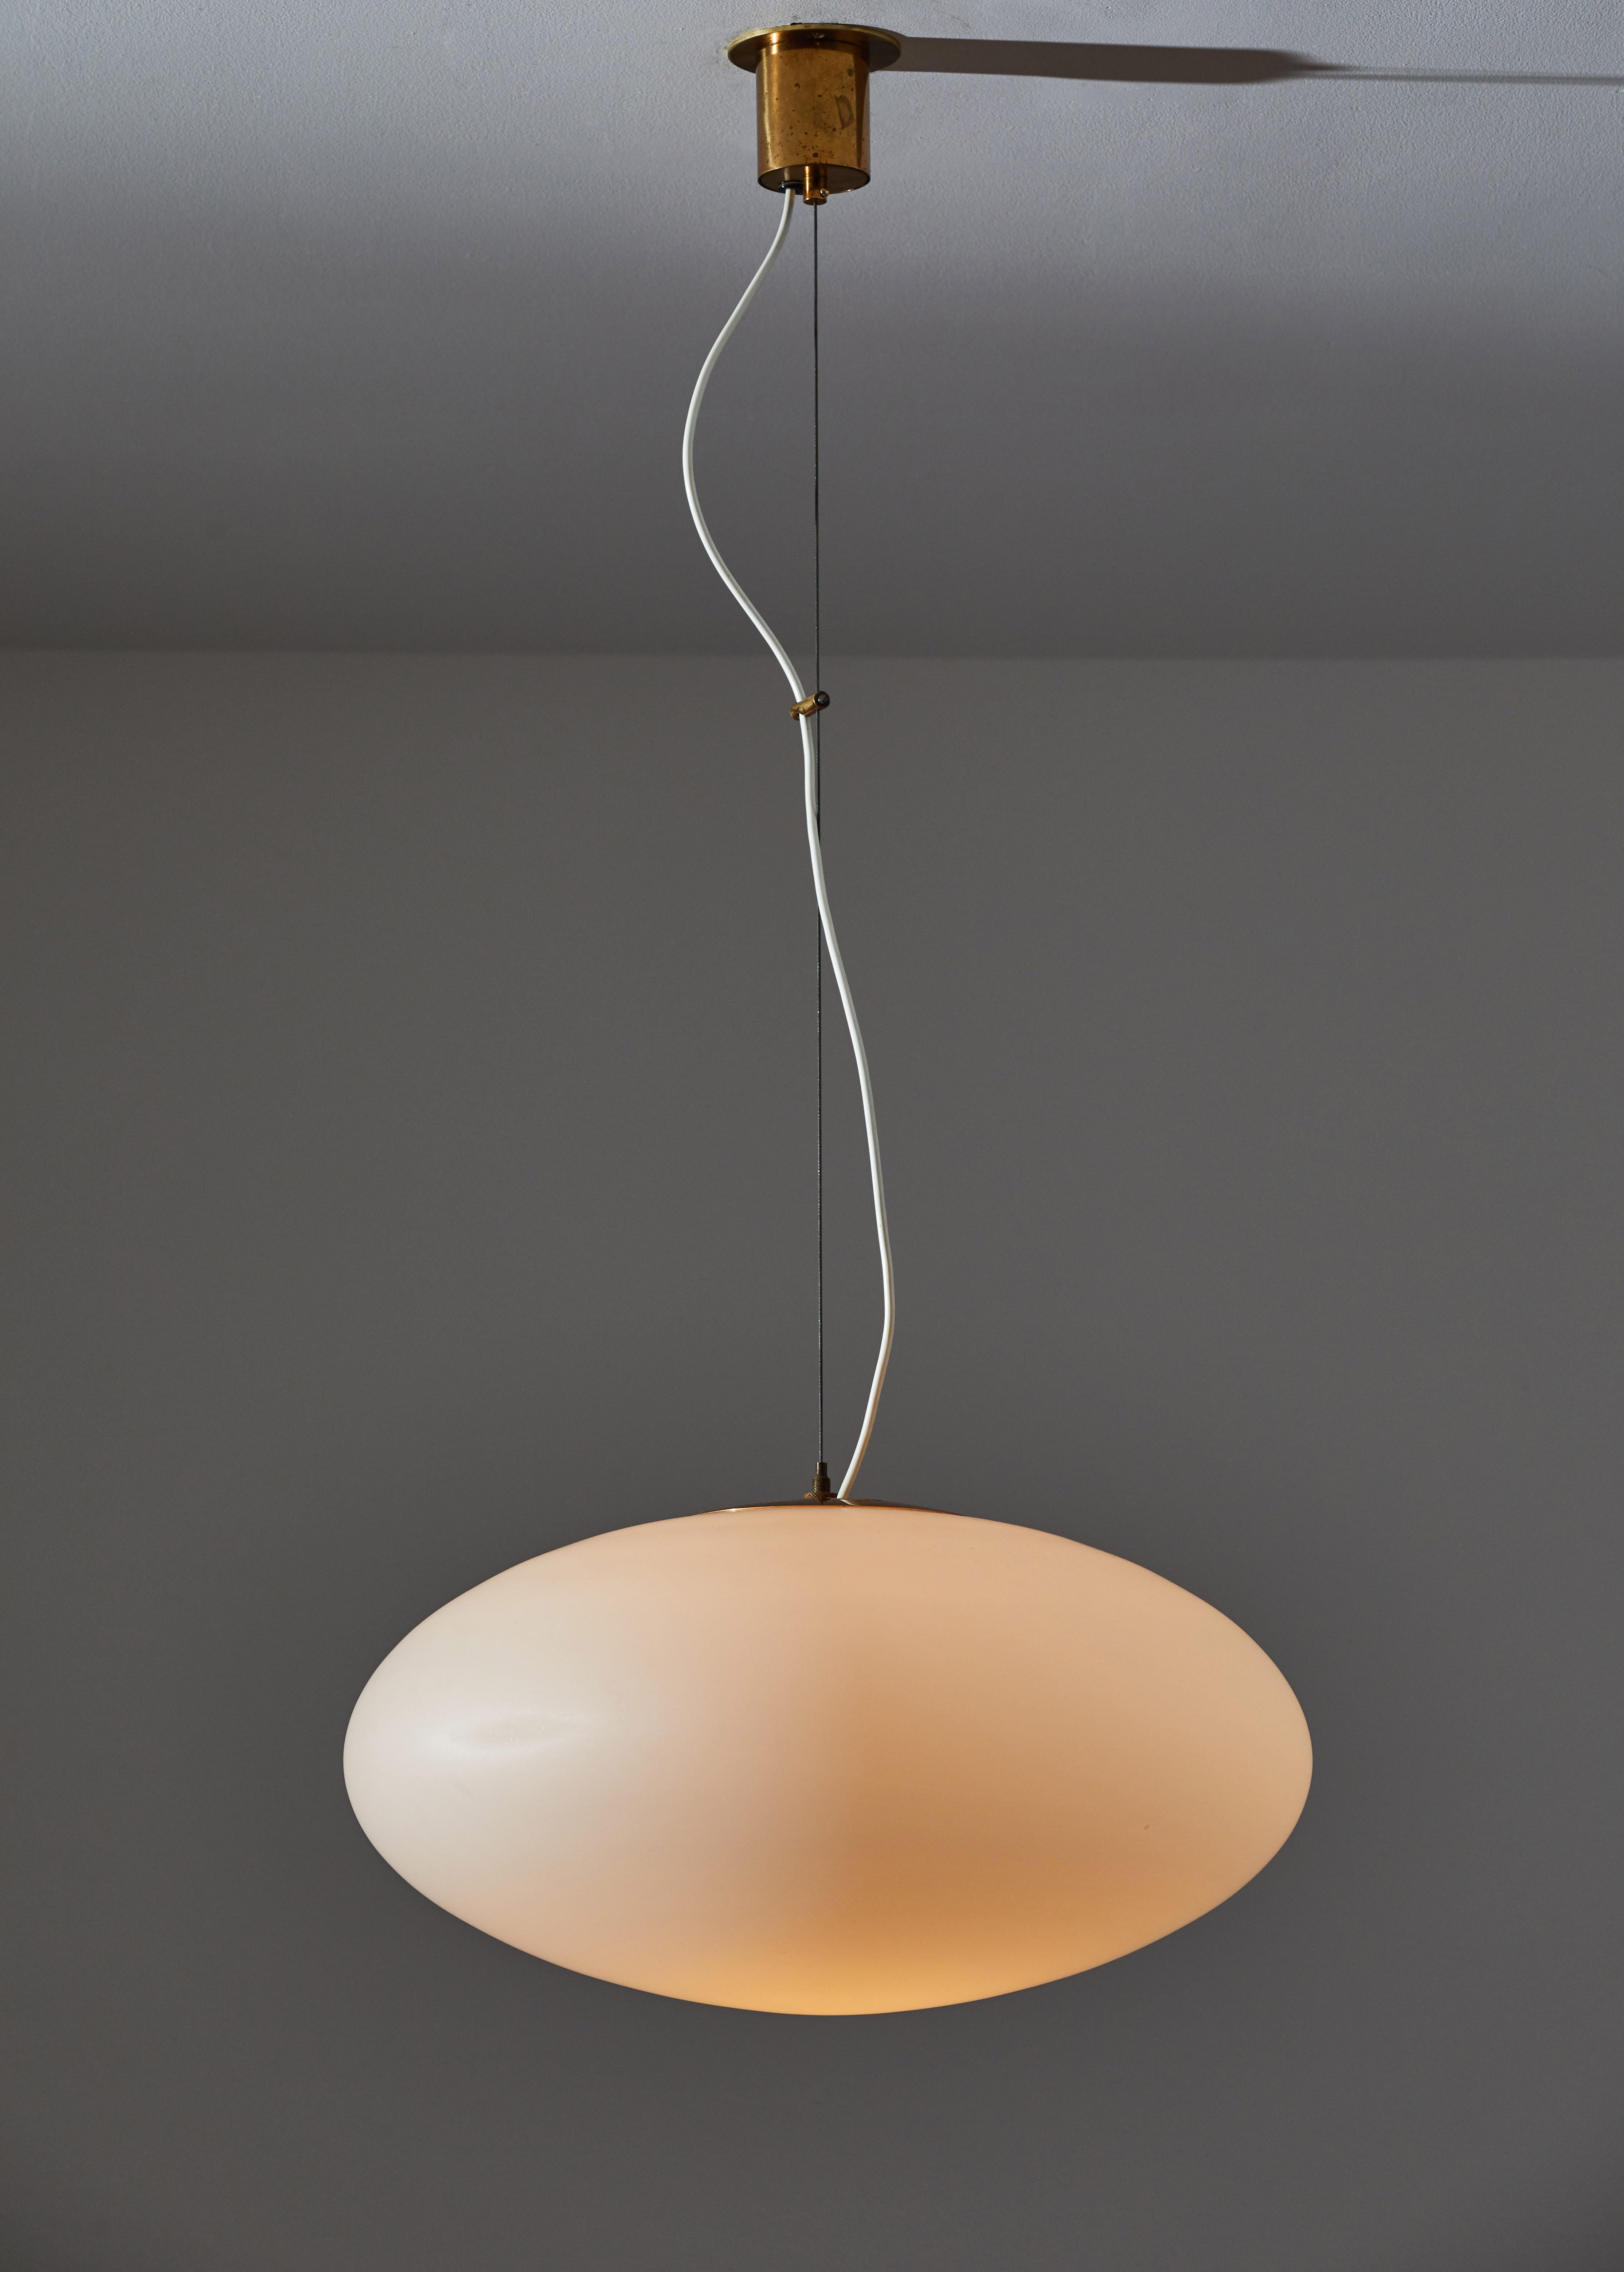 Suspension light by Stilnovo manufactured in Italy, circa 1950s. Brushed satin glass with brass hardware. Original canopy. Custom brass backplates. Rewired for US junction boxes. Overall drop can be customized. Takes one E27 100W maximum bulb. Bulbs